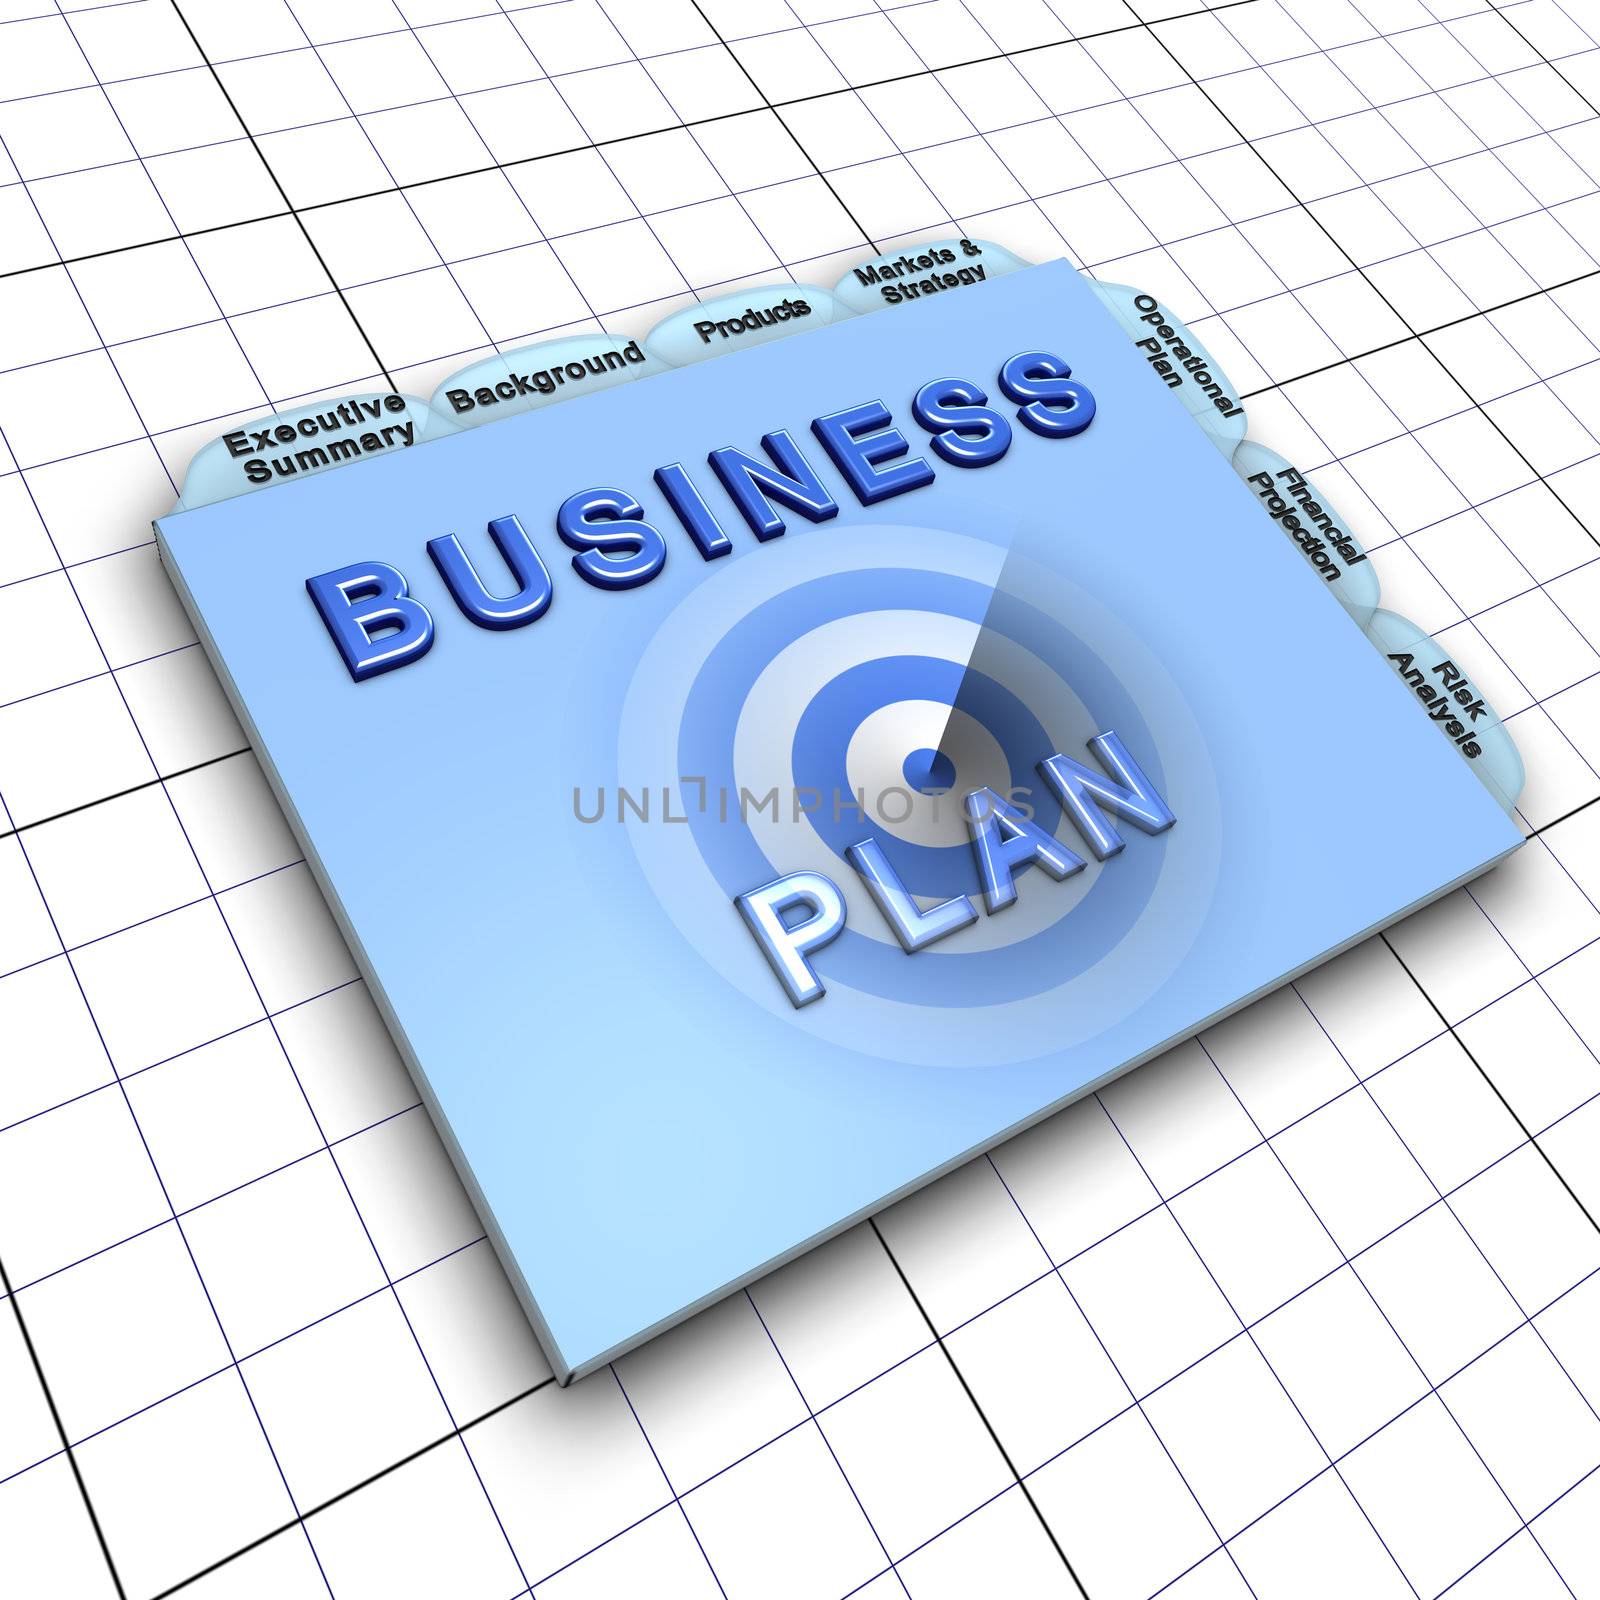 Business plan document: Process of planning ahead for success